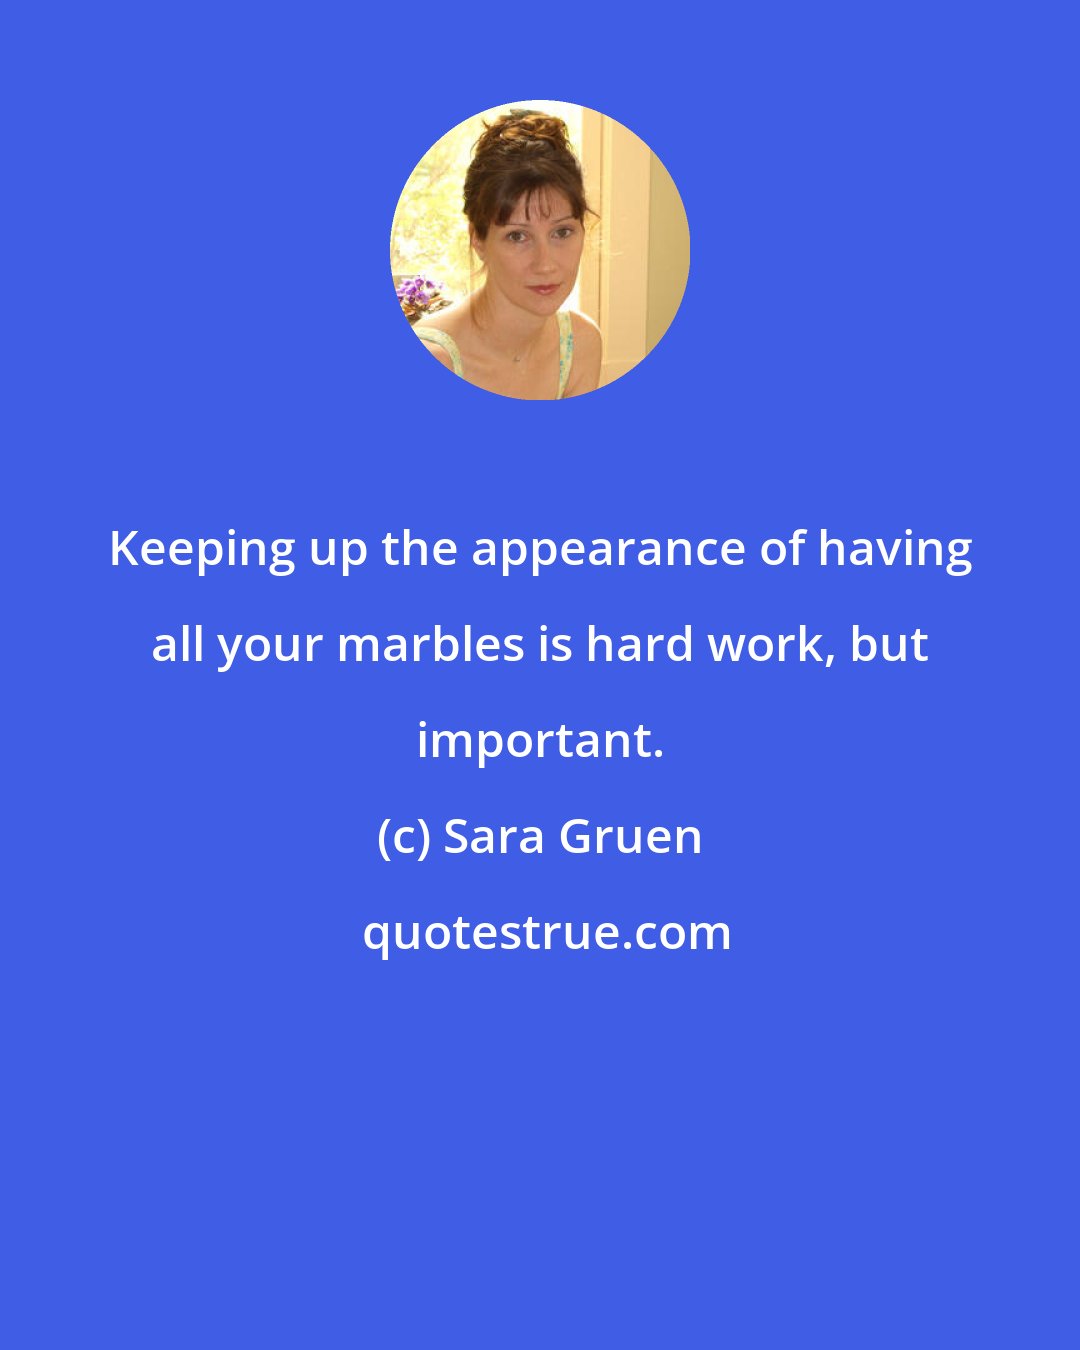 Sara Gruen: Keeping up the appearance of having all your marbles is hard work, but important.